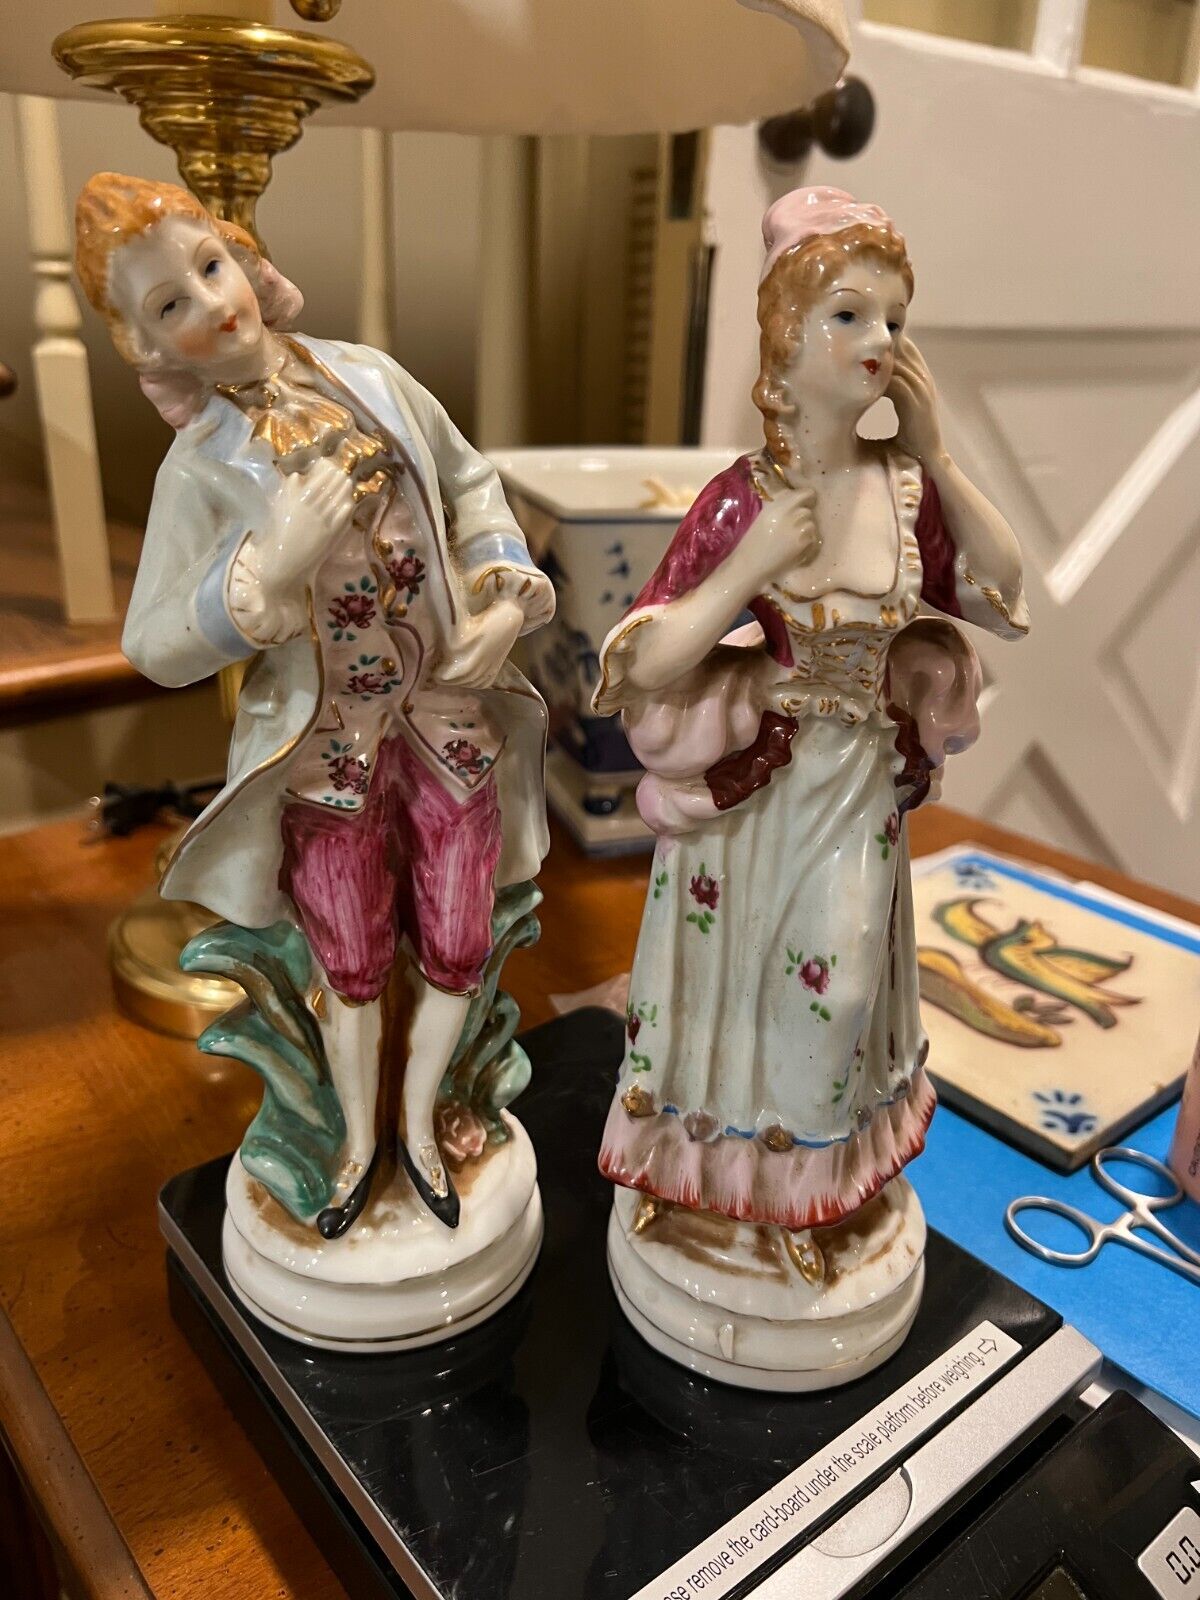 vintage porcelian figurines of 18th century ?french lady and gentleman.